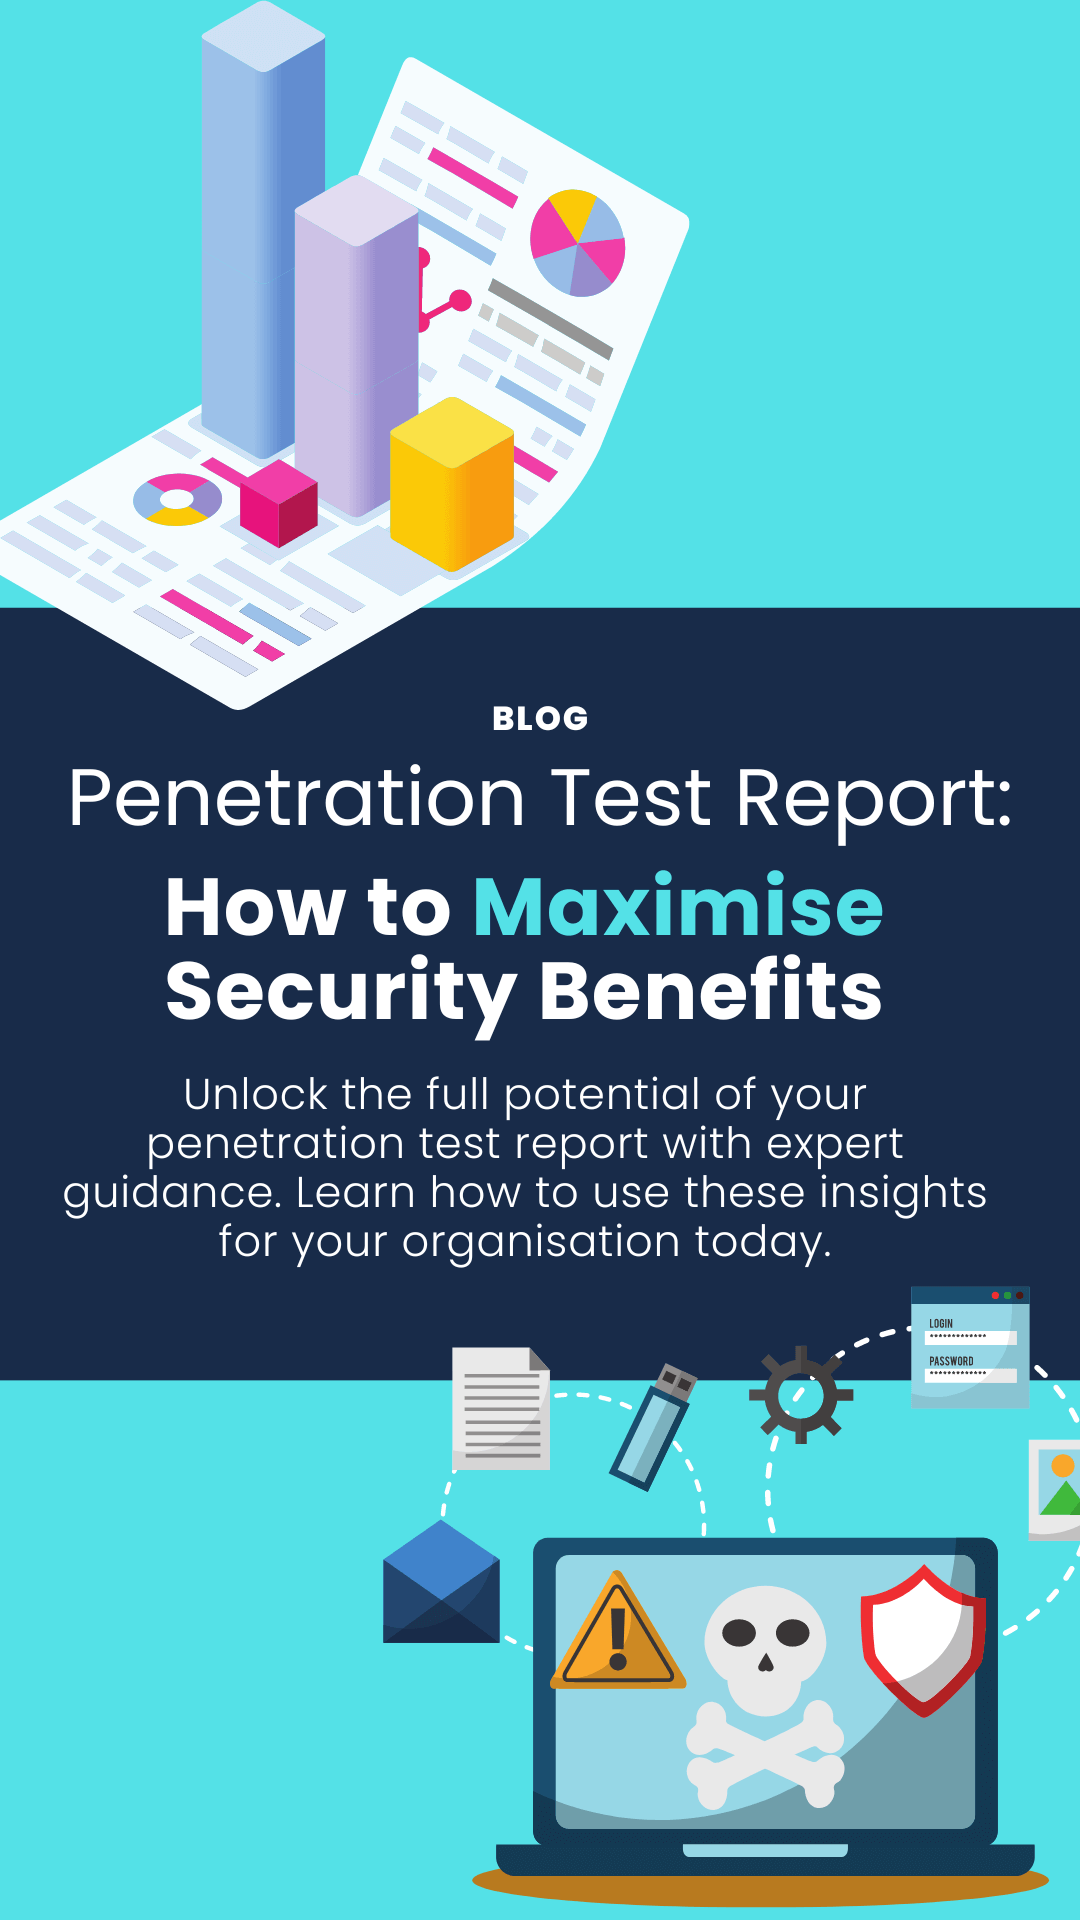 Penetration Testing report blog, how to make the most out of results